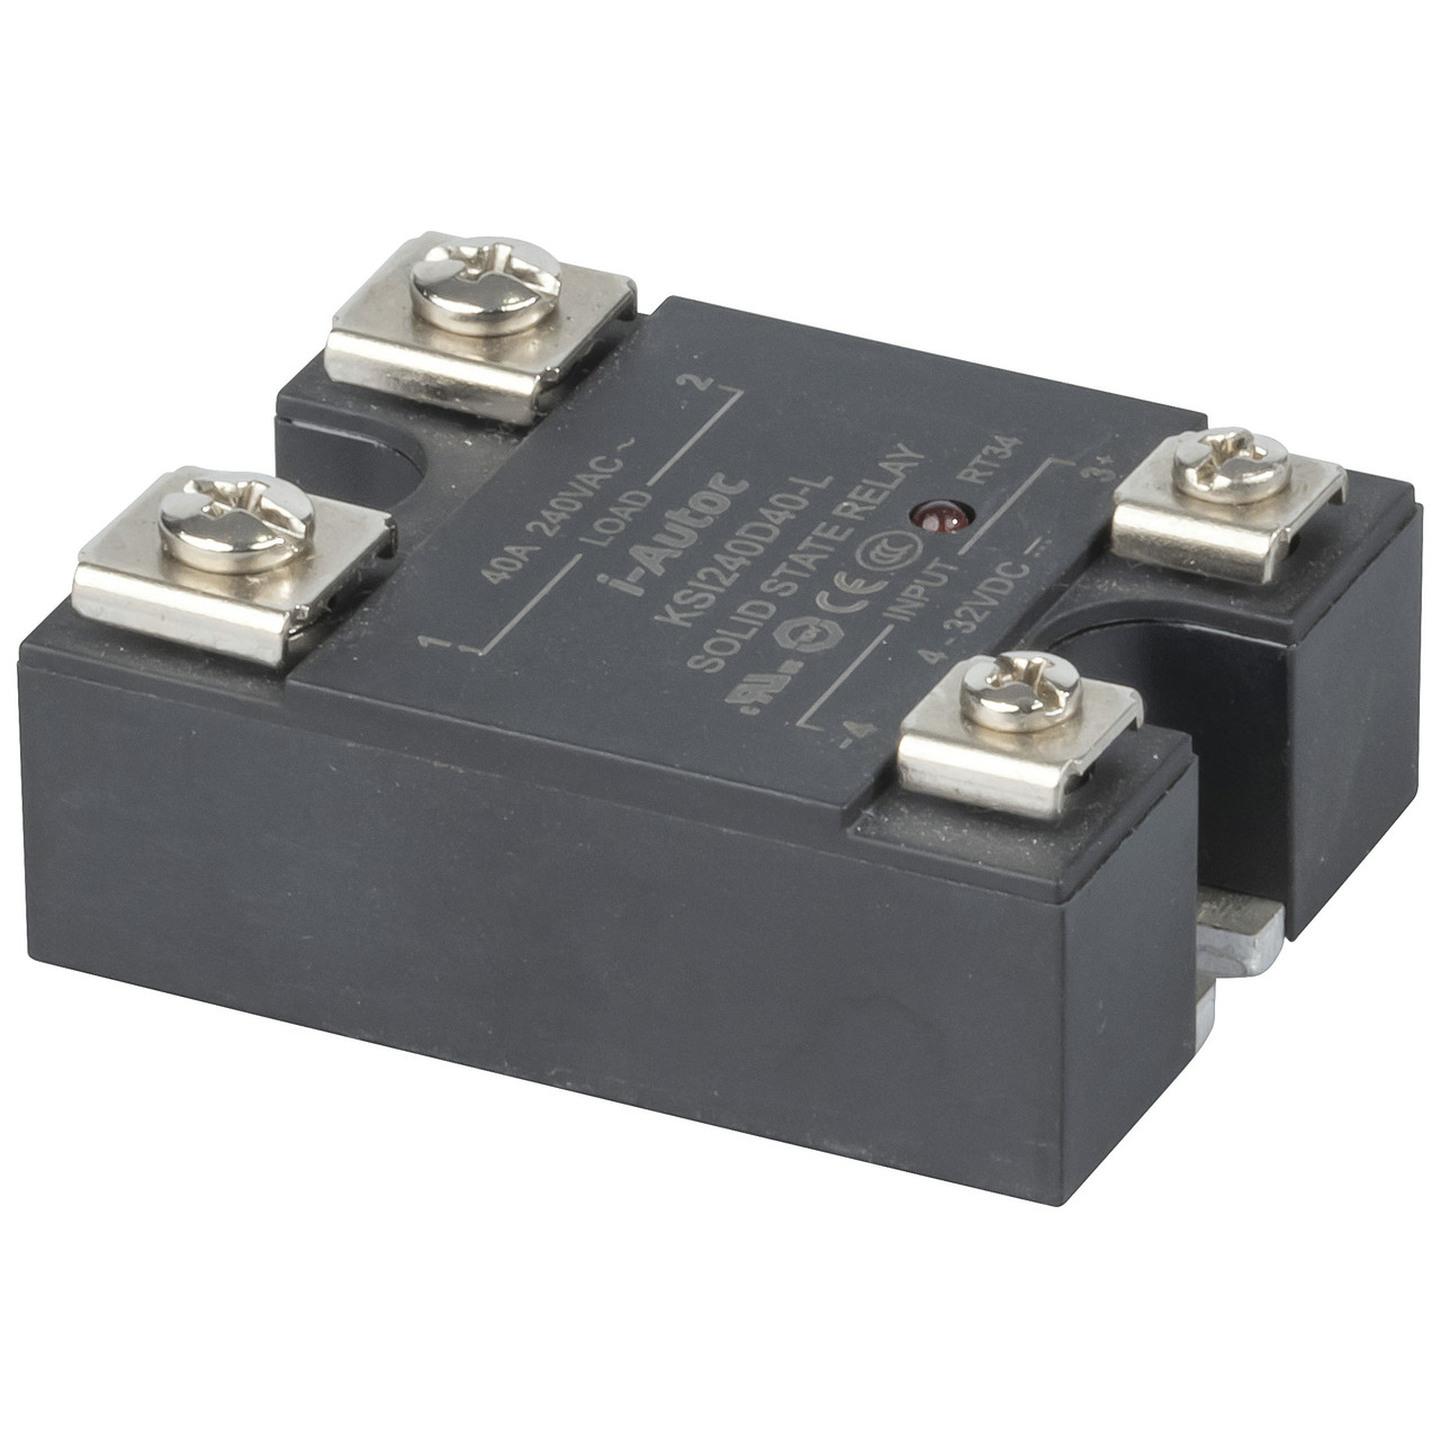 Solid State Relay 4-32VDC Input 240VAC 40A Switching